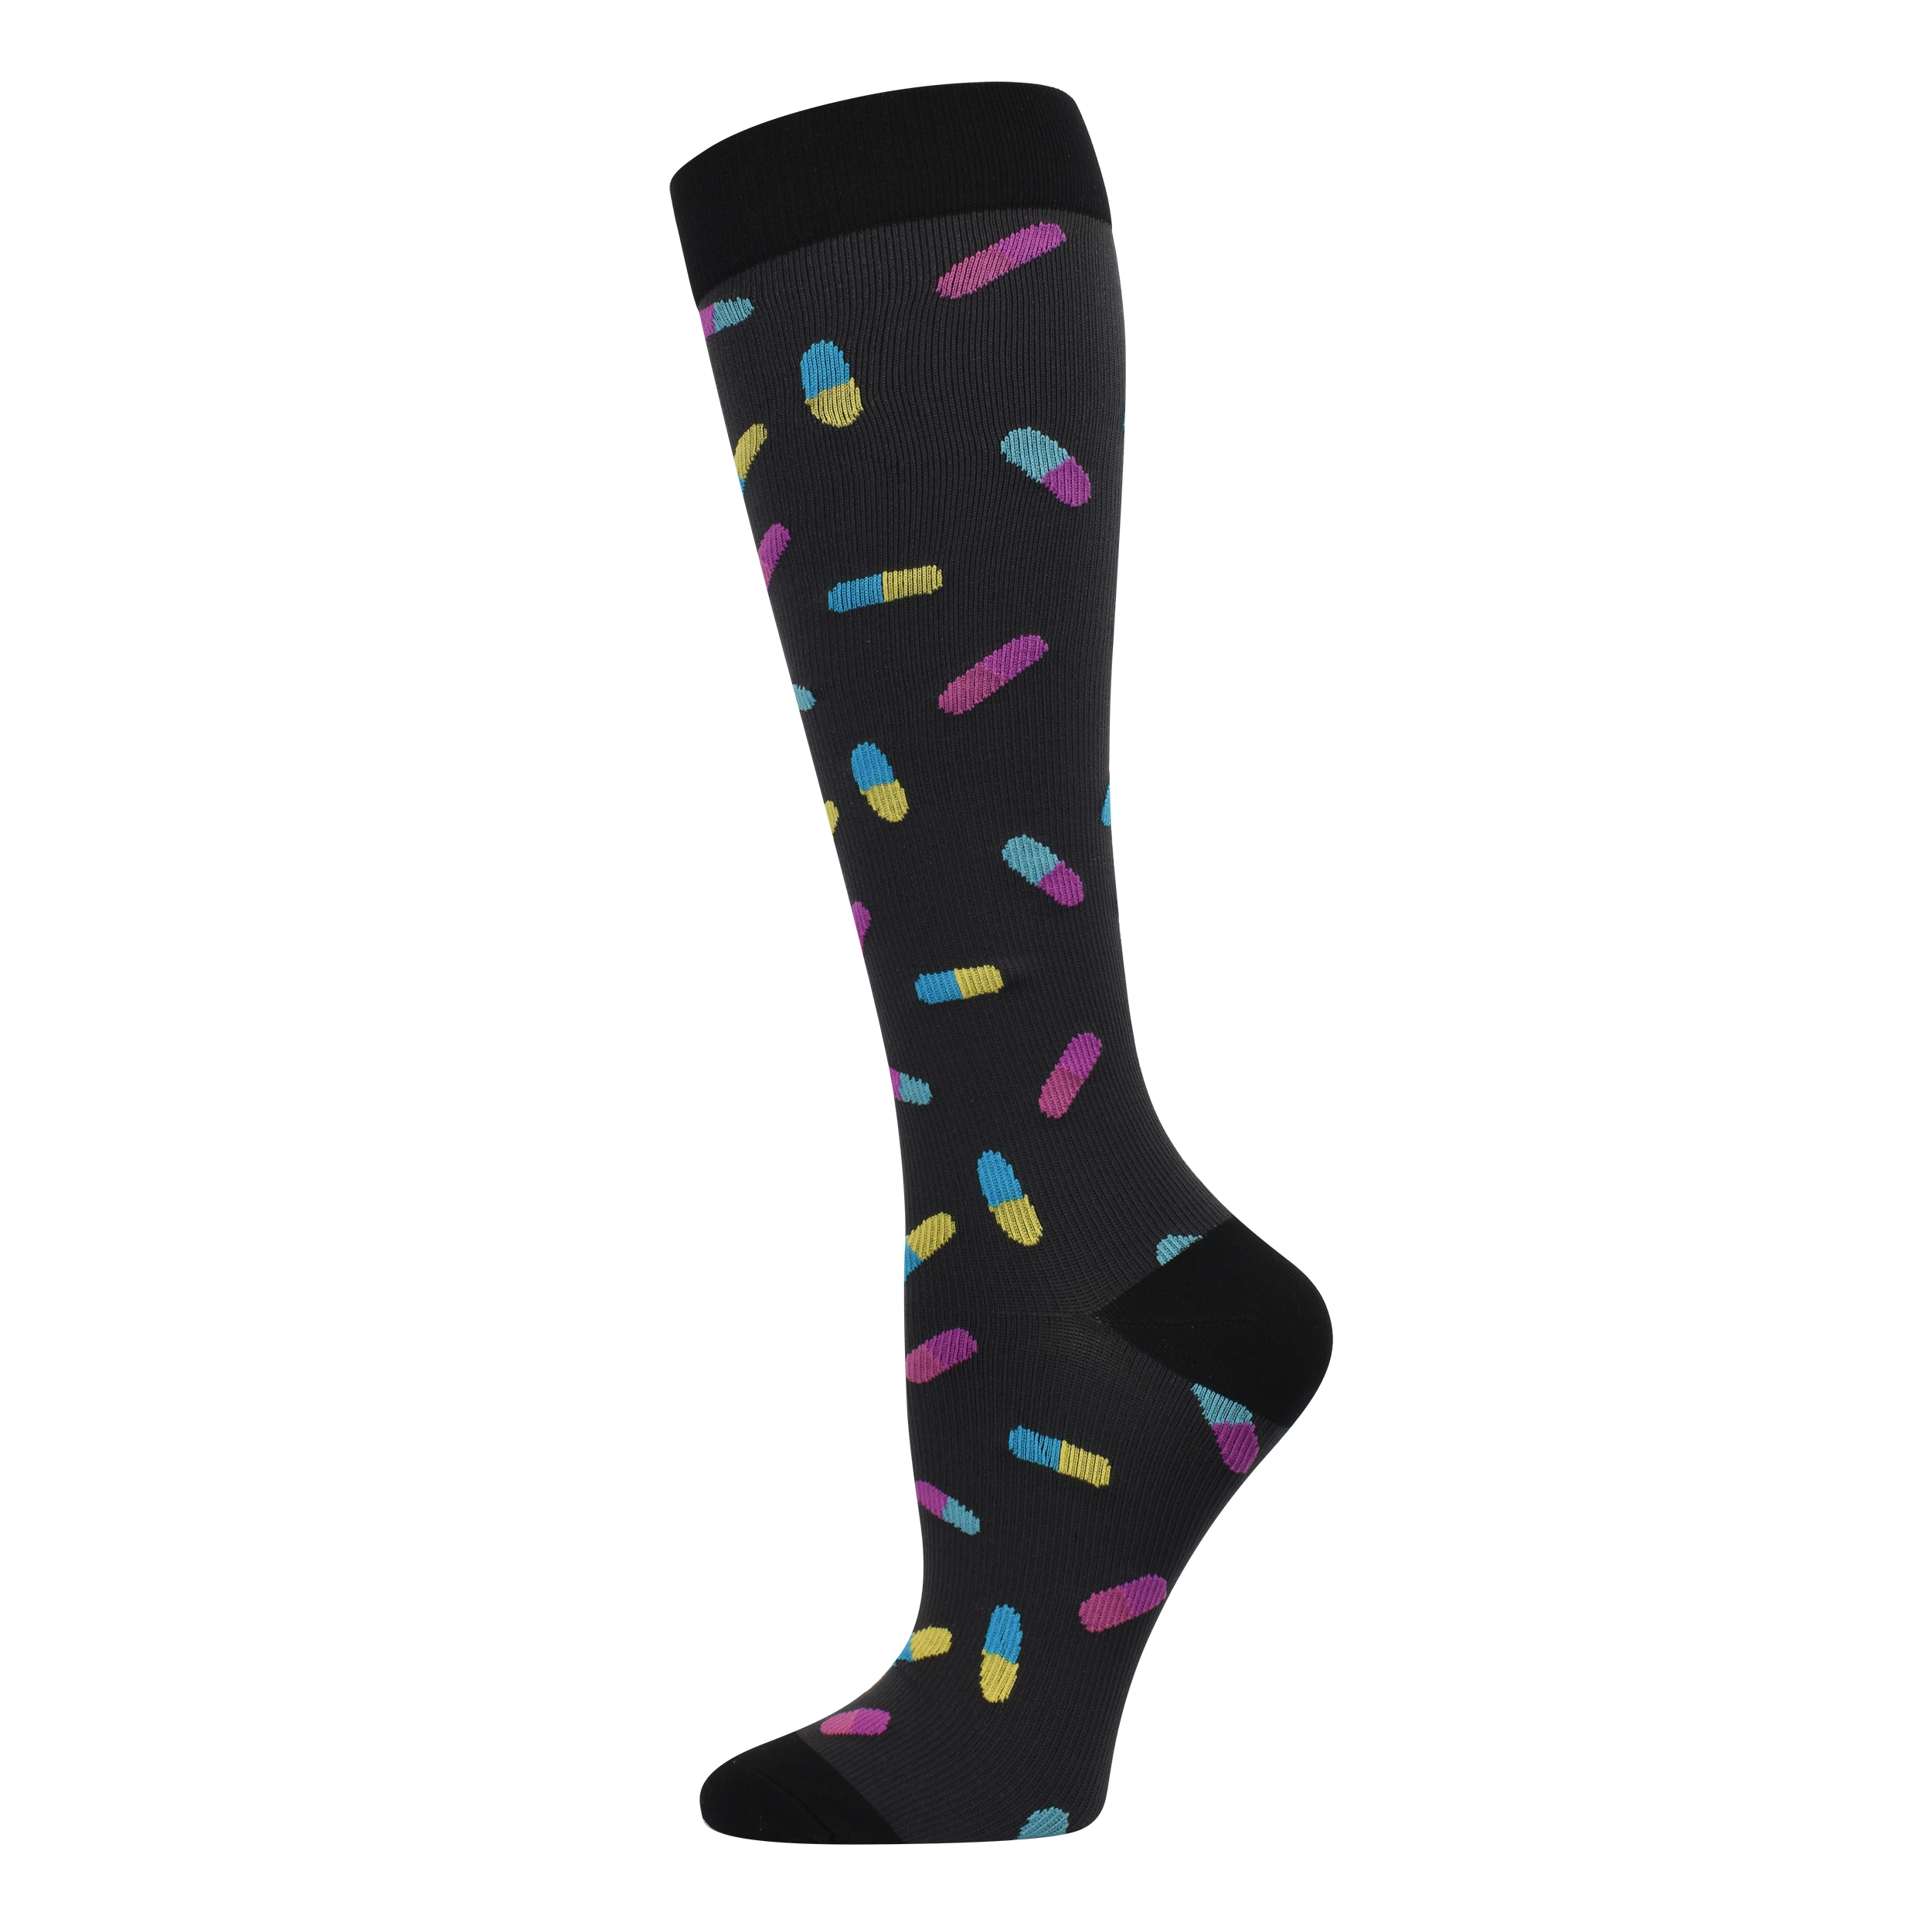 medical supply store compression socks near me